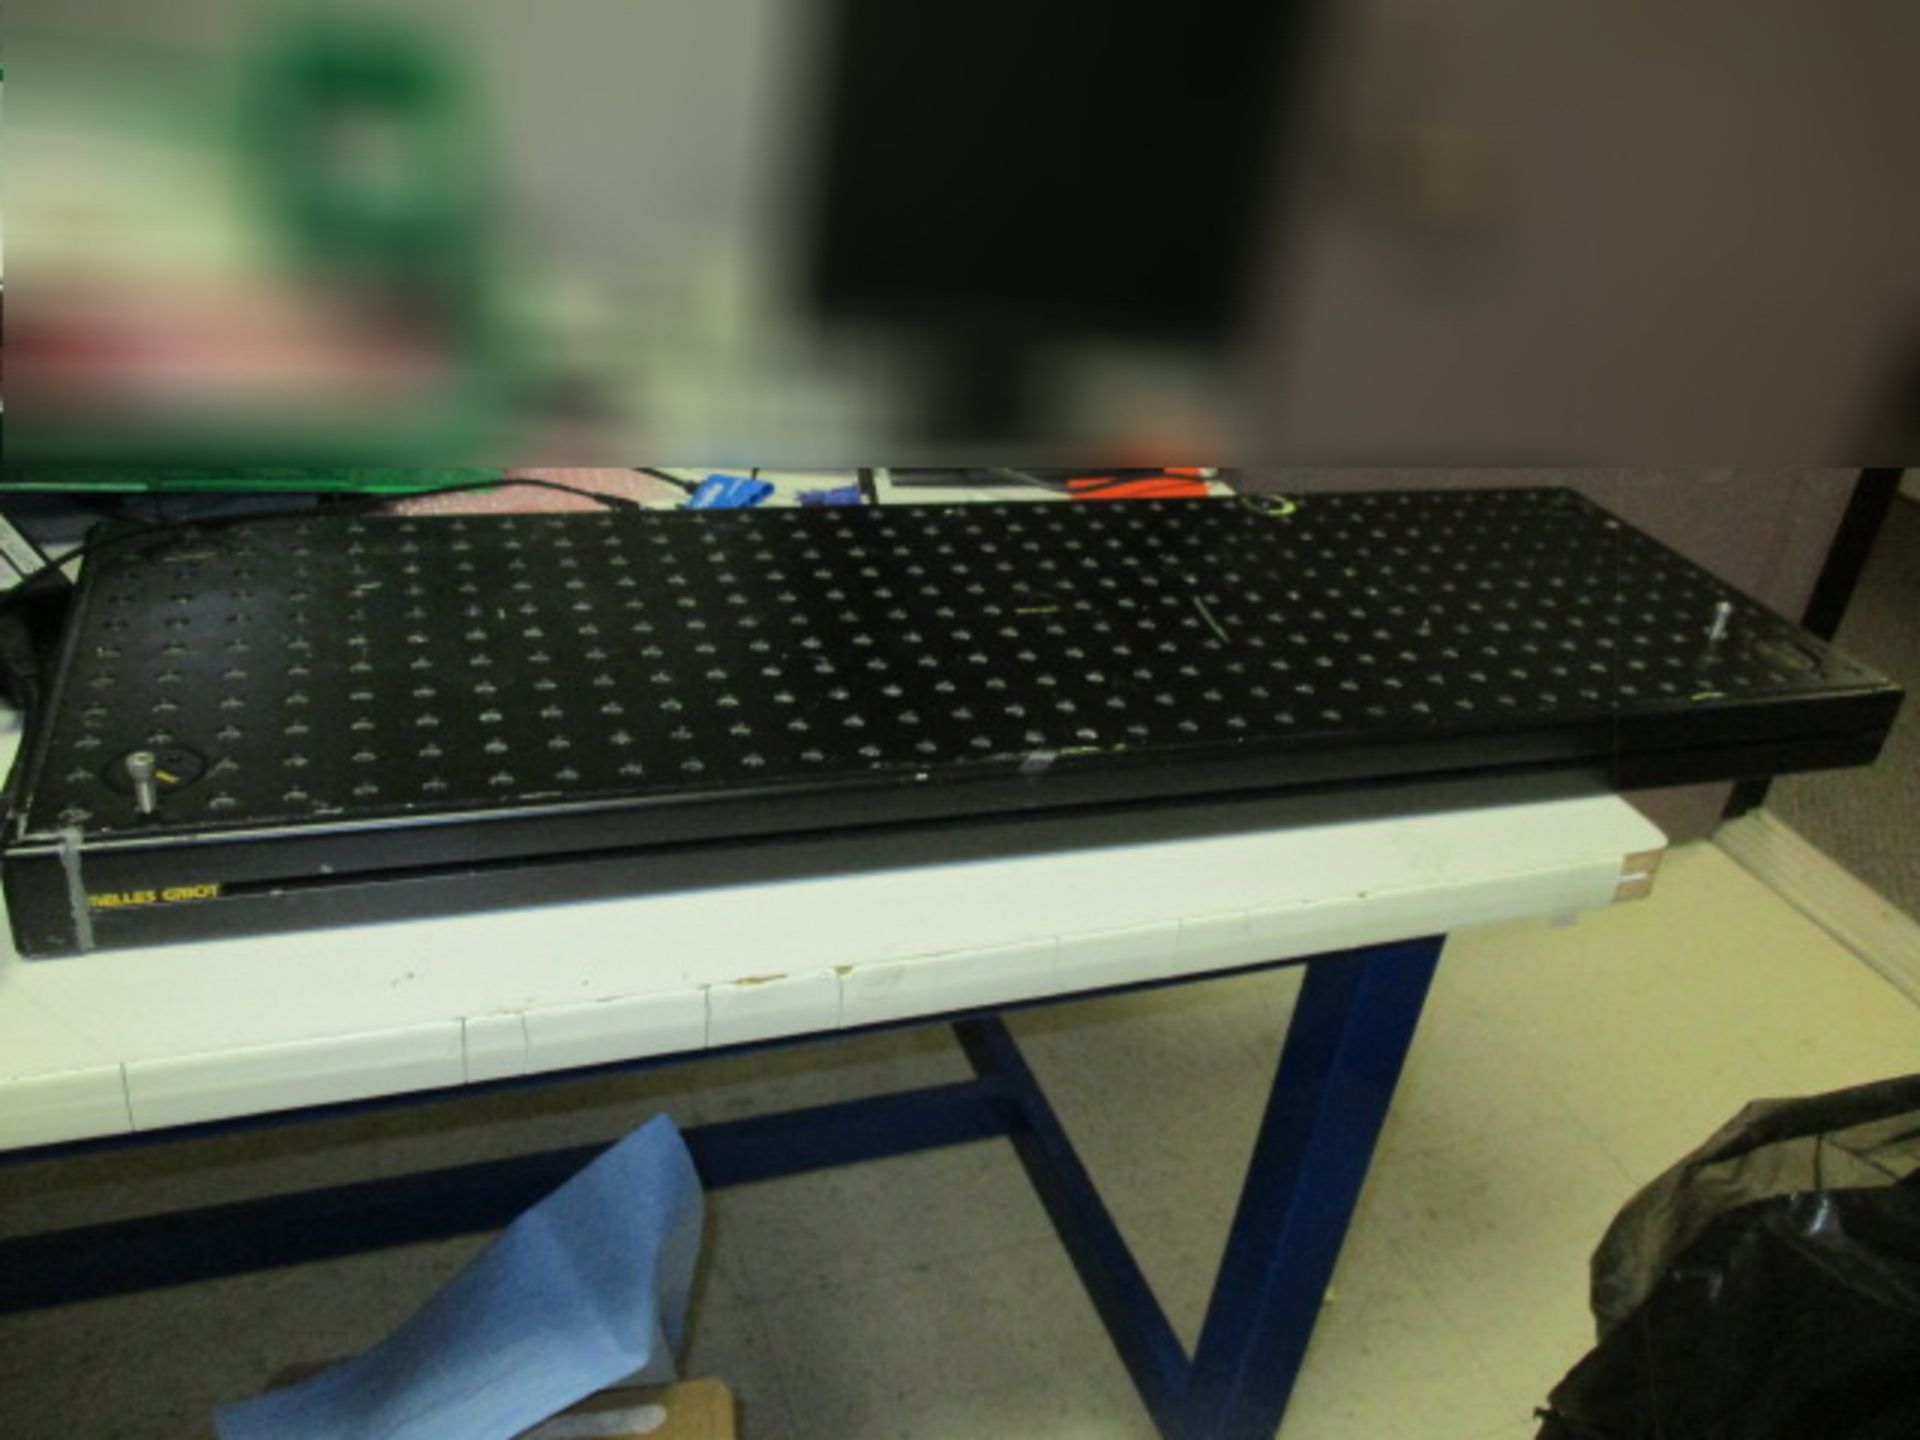 Optical Breadboard 35.5"Lx11.5Wx2"Thk, Melles Griot. LOC: Area-4. Asset Located At Clarity Medical